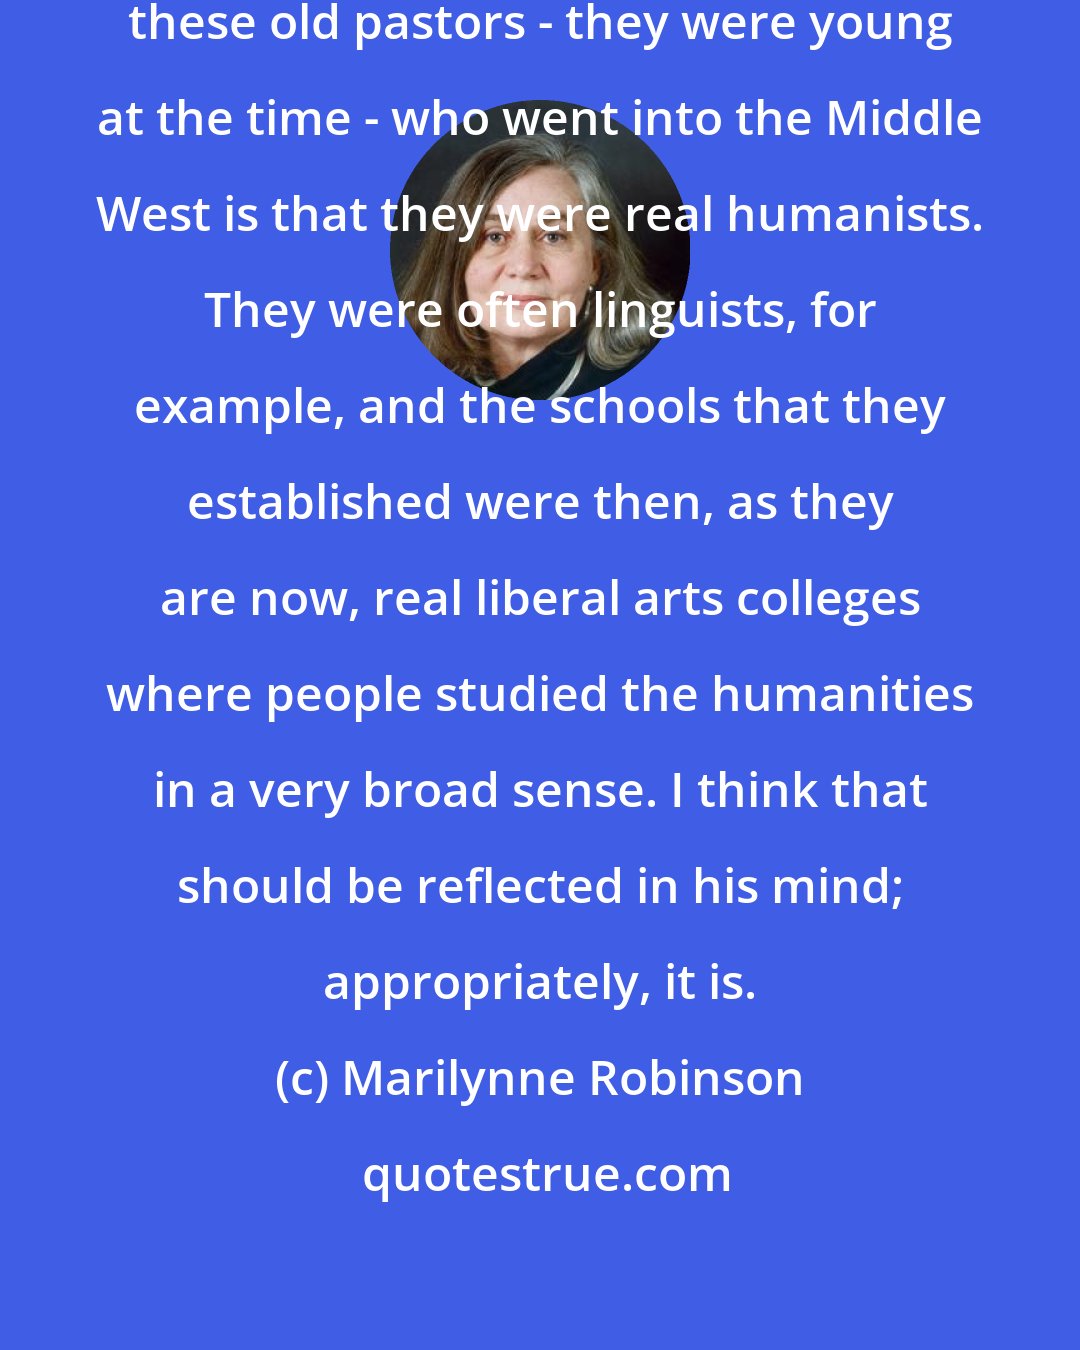 Marilynne Robinson: One of the things that is nice about these old pastors - they were young at the time - who went into the Middle West is that they were real humanists. They were often linguists, for example, and the schools that they established were then, as they are now, real liberal arts colleges where people studied the humanities in a very broad sense. I think that should be reflected in his mind; appropriately, it is.